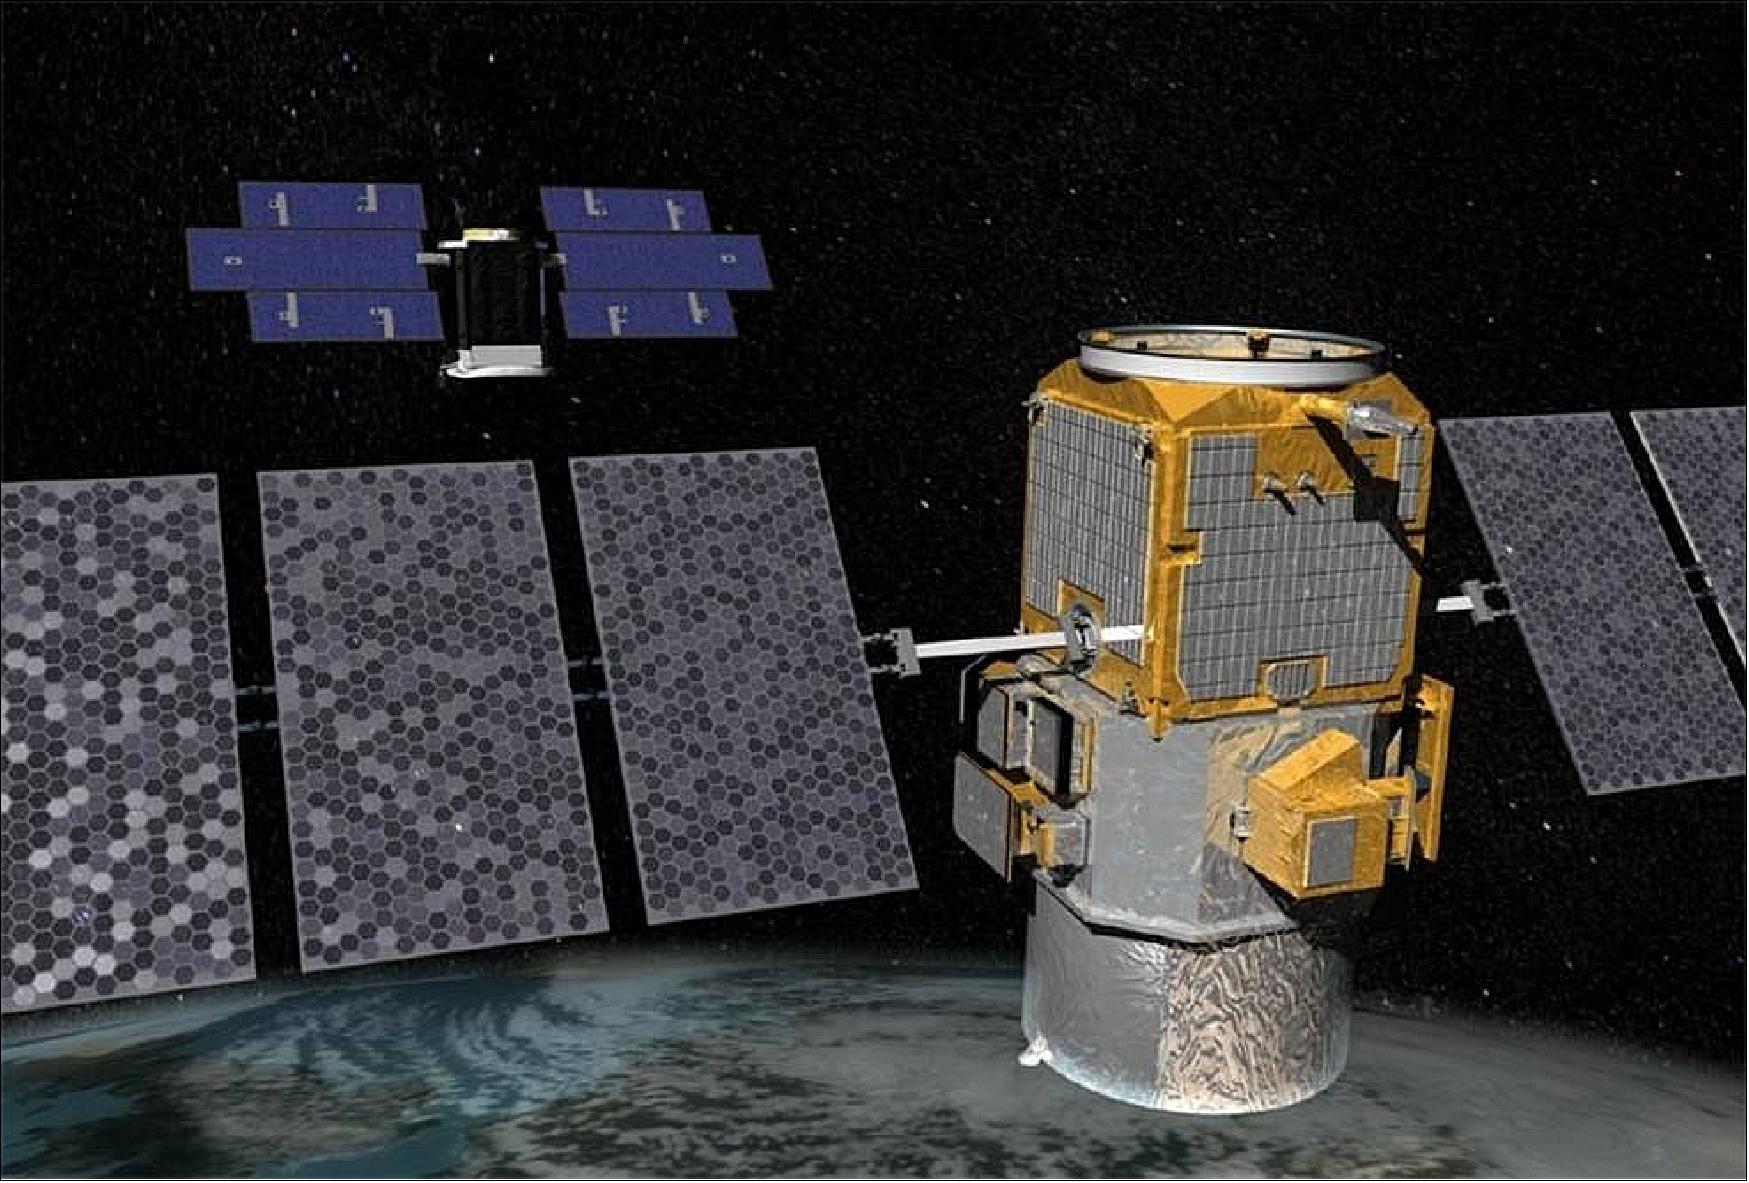 Figure 17: In February 2018, facing a mechanical challenge, CloudSat (pictured in background) had to exit the A-Train, or afternoon constellation, of Earth-orbiting satellites, and move to a lower orbit. Following an exit maneuver of its own in September, CALIPSO (foreground) has joined CloudSat, forming what NASA scientists are calling the C-Train (image credit: NASA)